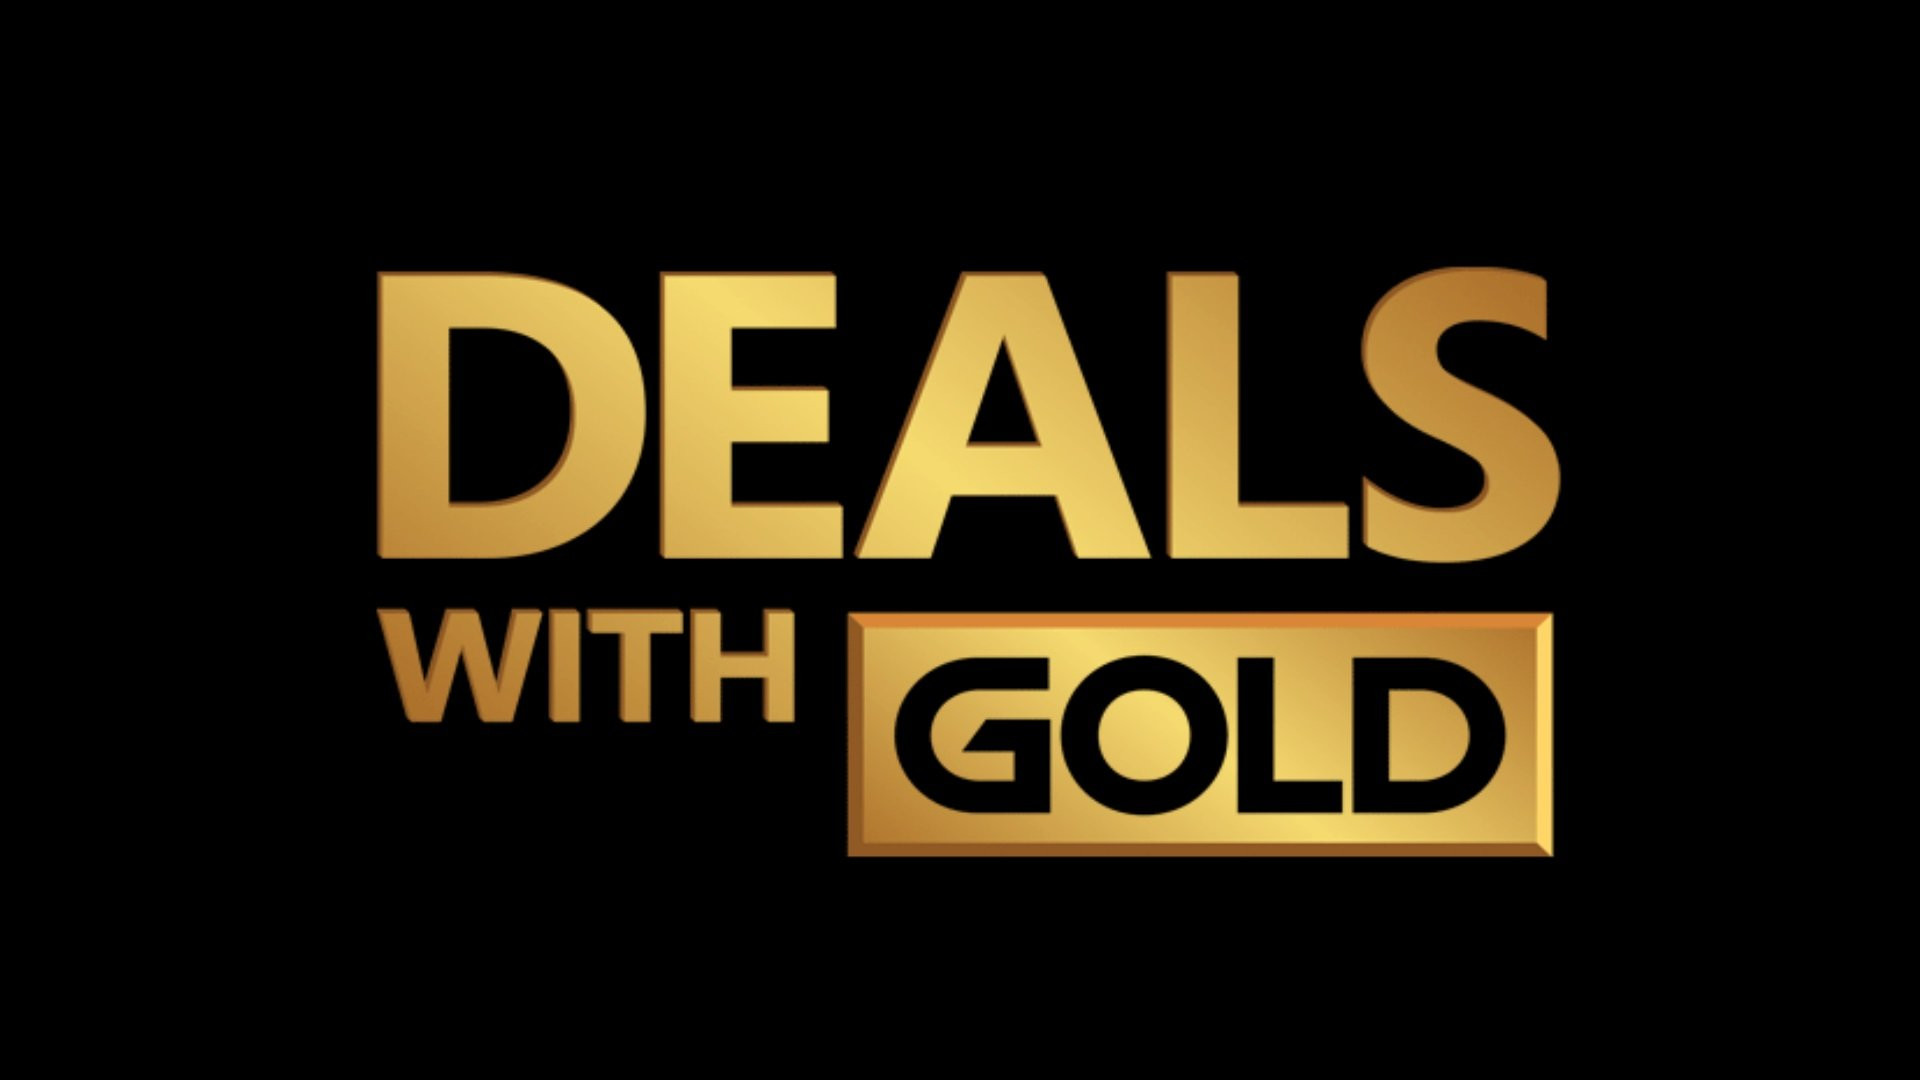 Deals with Gold semaine 42